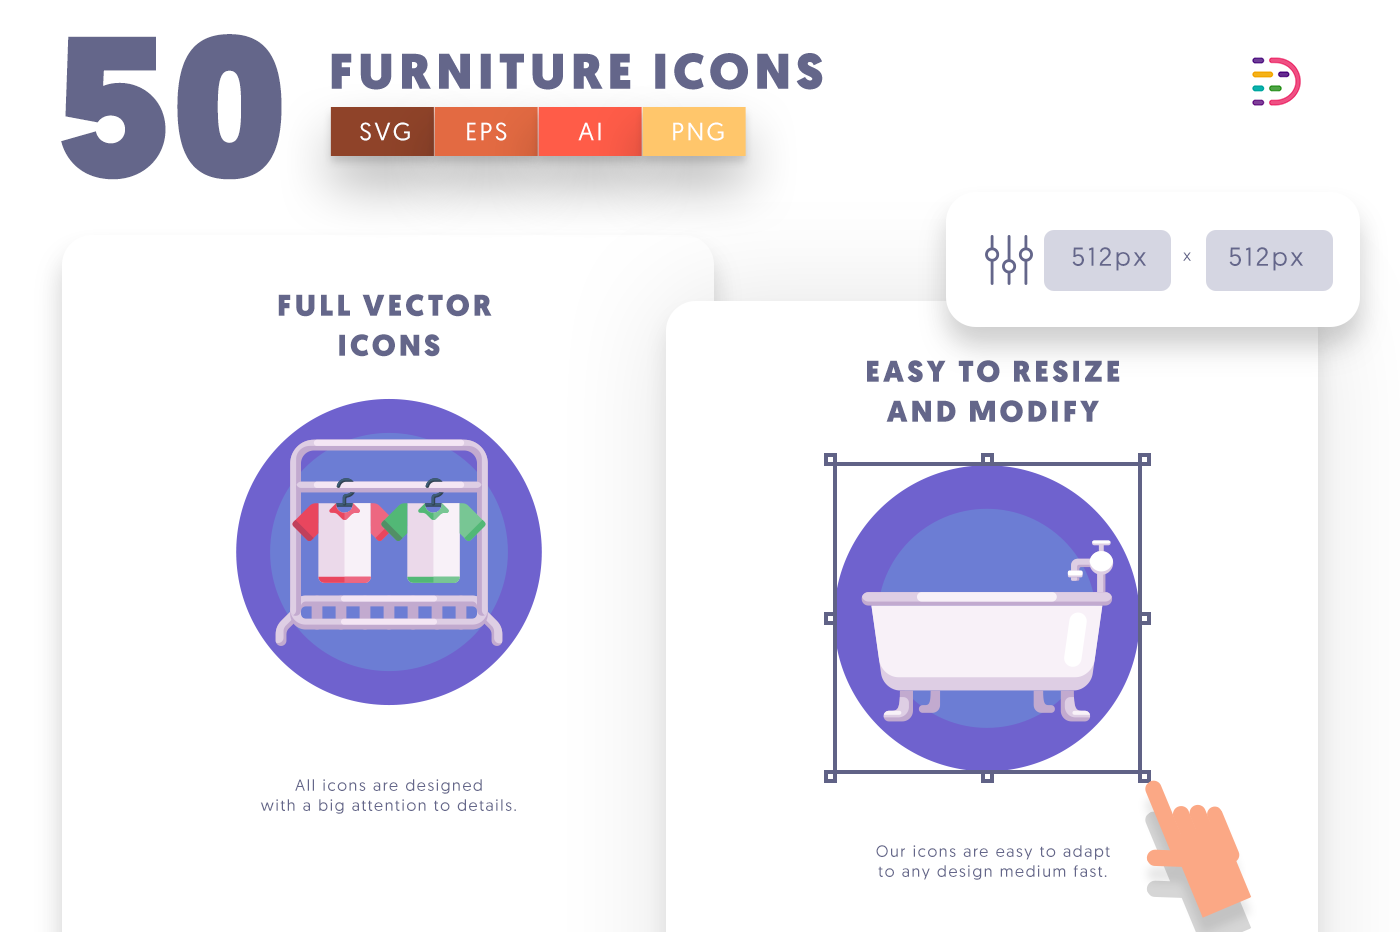 Full vector Furniture Icons